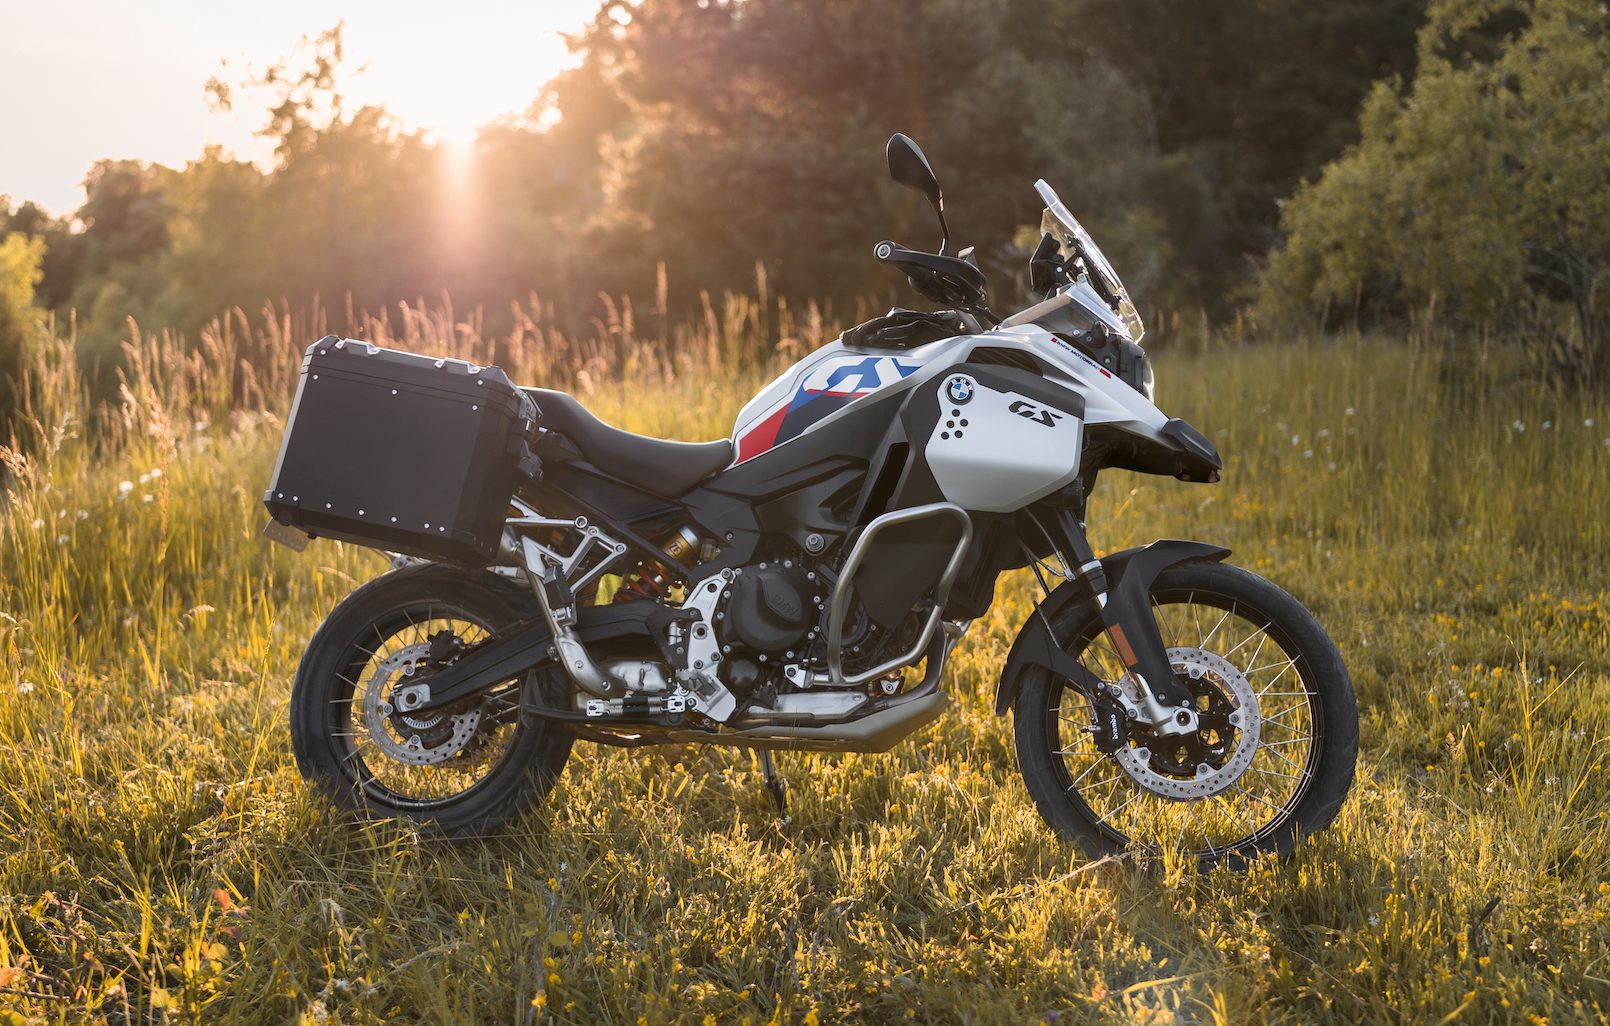 BMW's all-new F 900 GS Adventure. Media provided by BMW Motorrad.